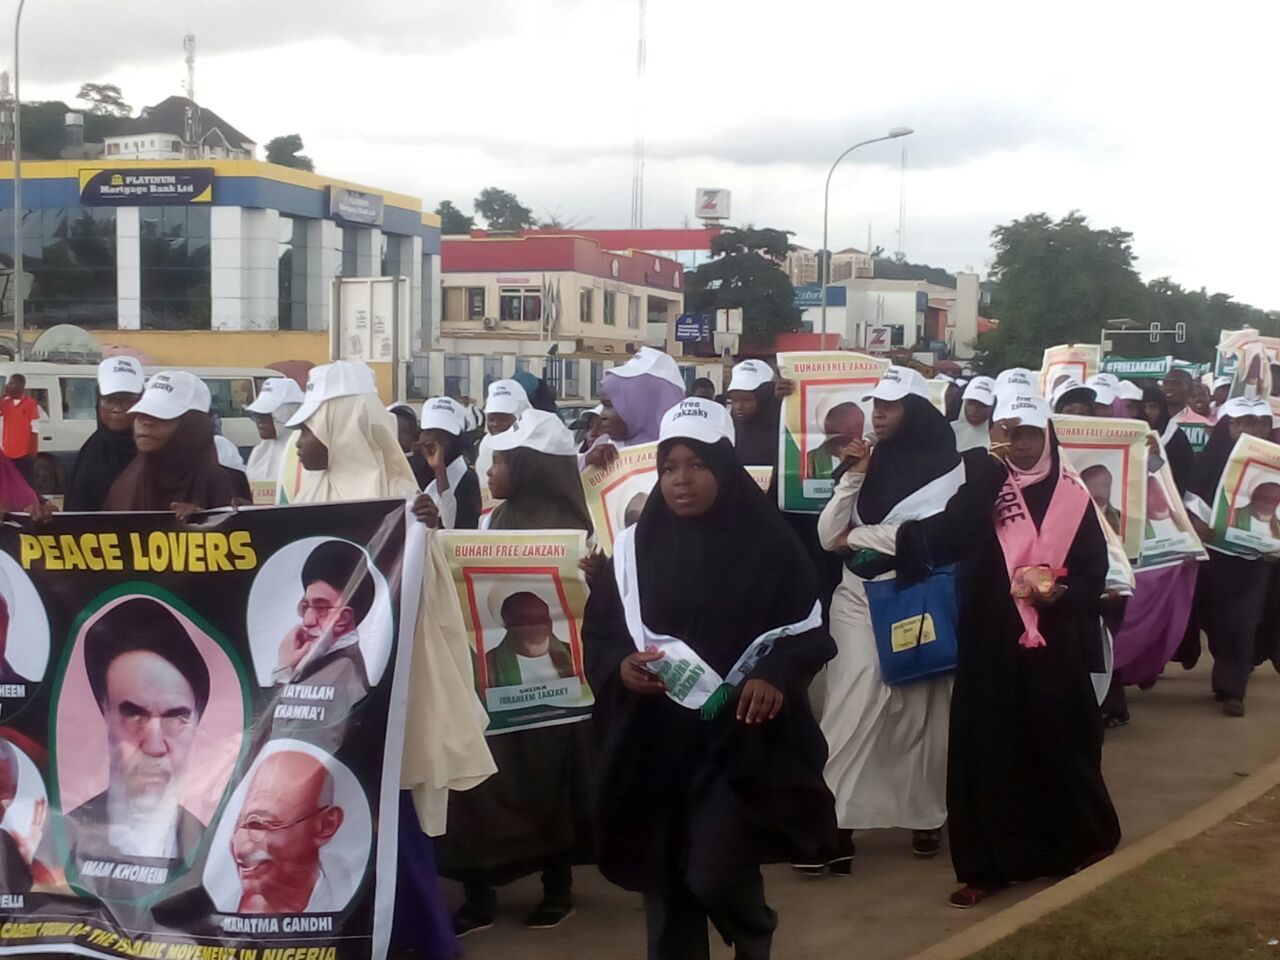 free zakzaky protest in abuja by students